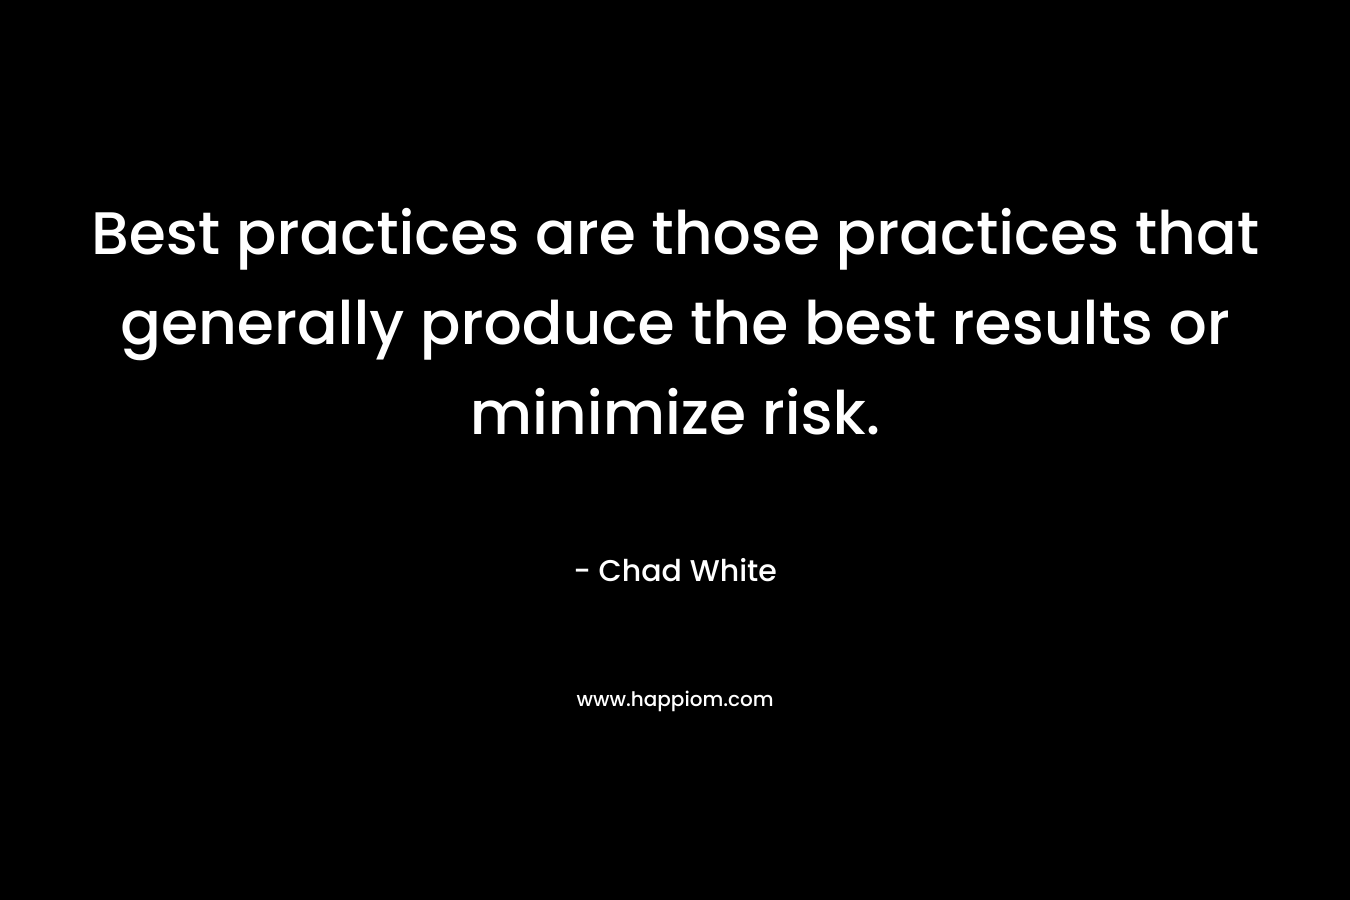 Best practices are those practices that generally produce the best results or minimize risk. – Chad White